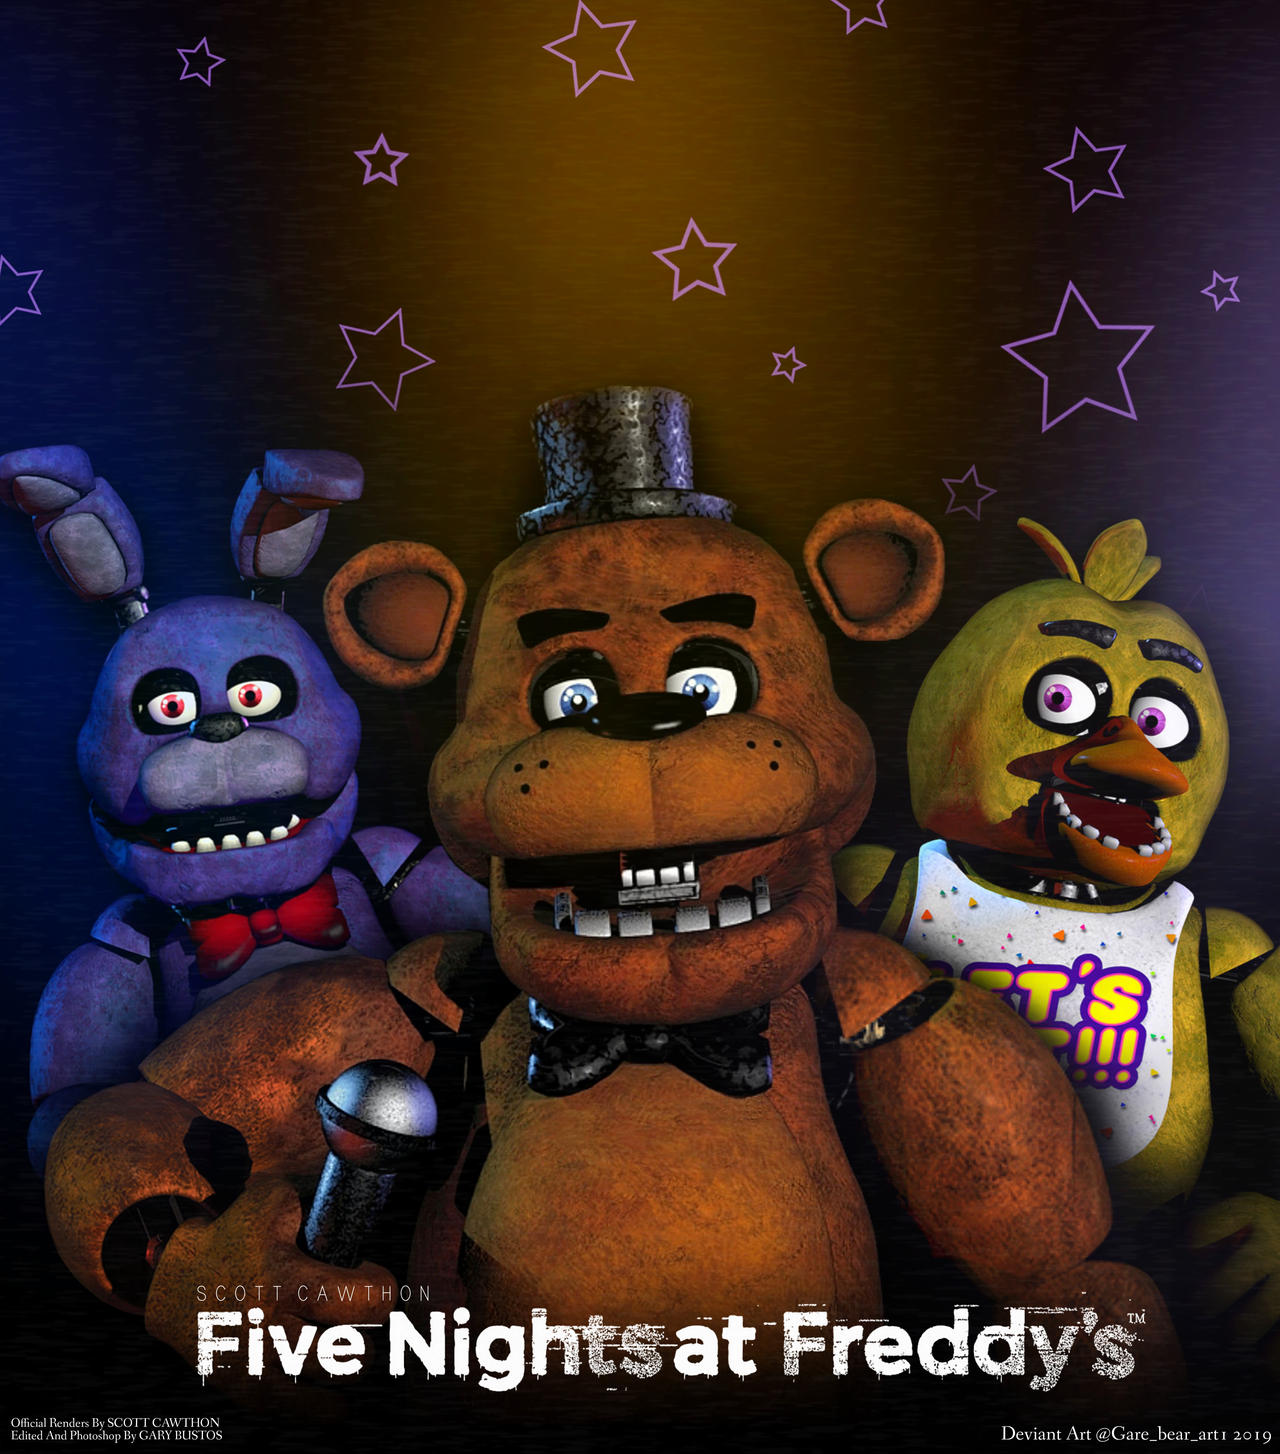 Five Nights At Freddy's Characters by GareBearArt1 on DeviantArt